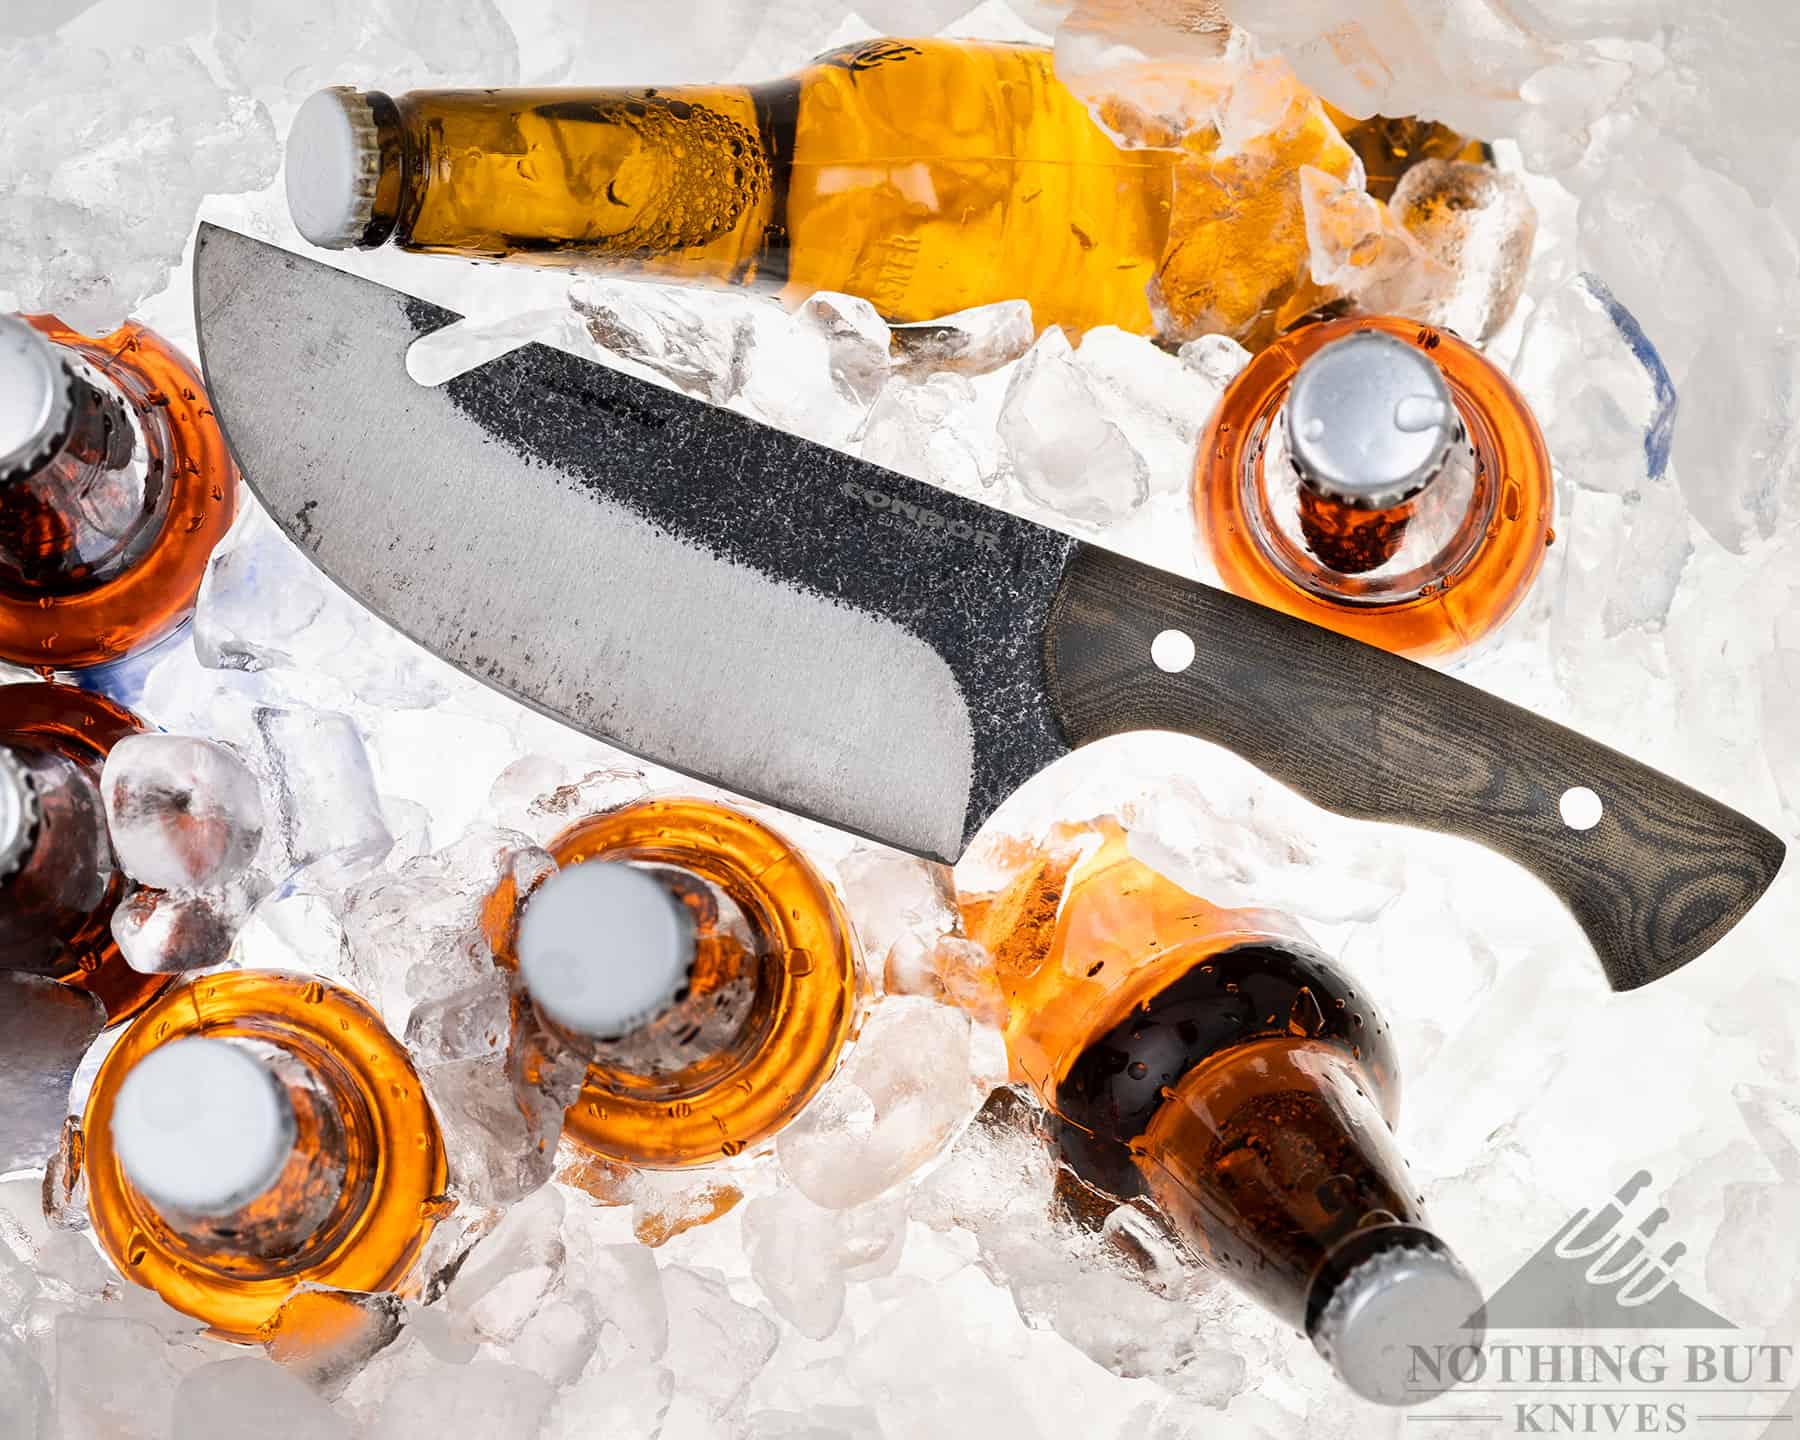 The Condor Bush Slicer has a notch on the blade for pulling pots off a campfire. This notch is handy for opening beer bottles.